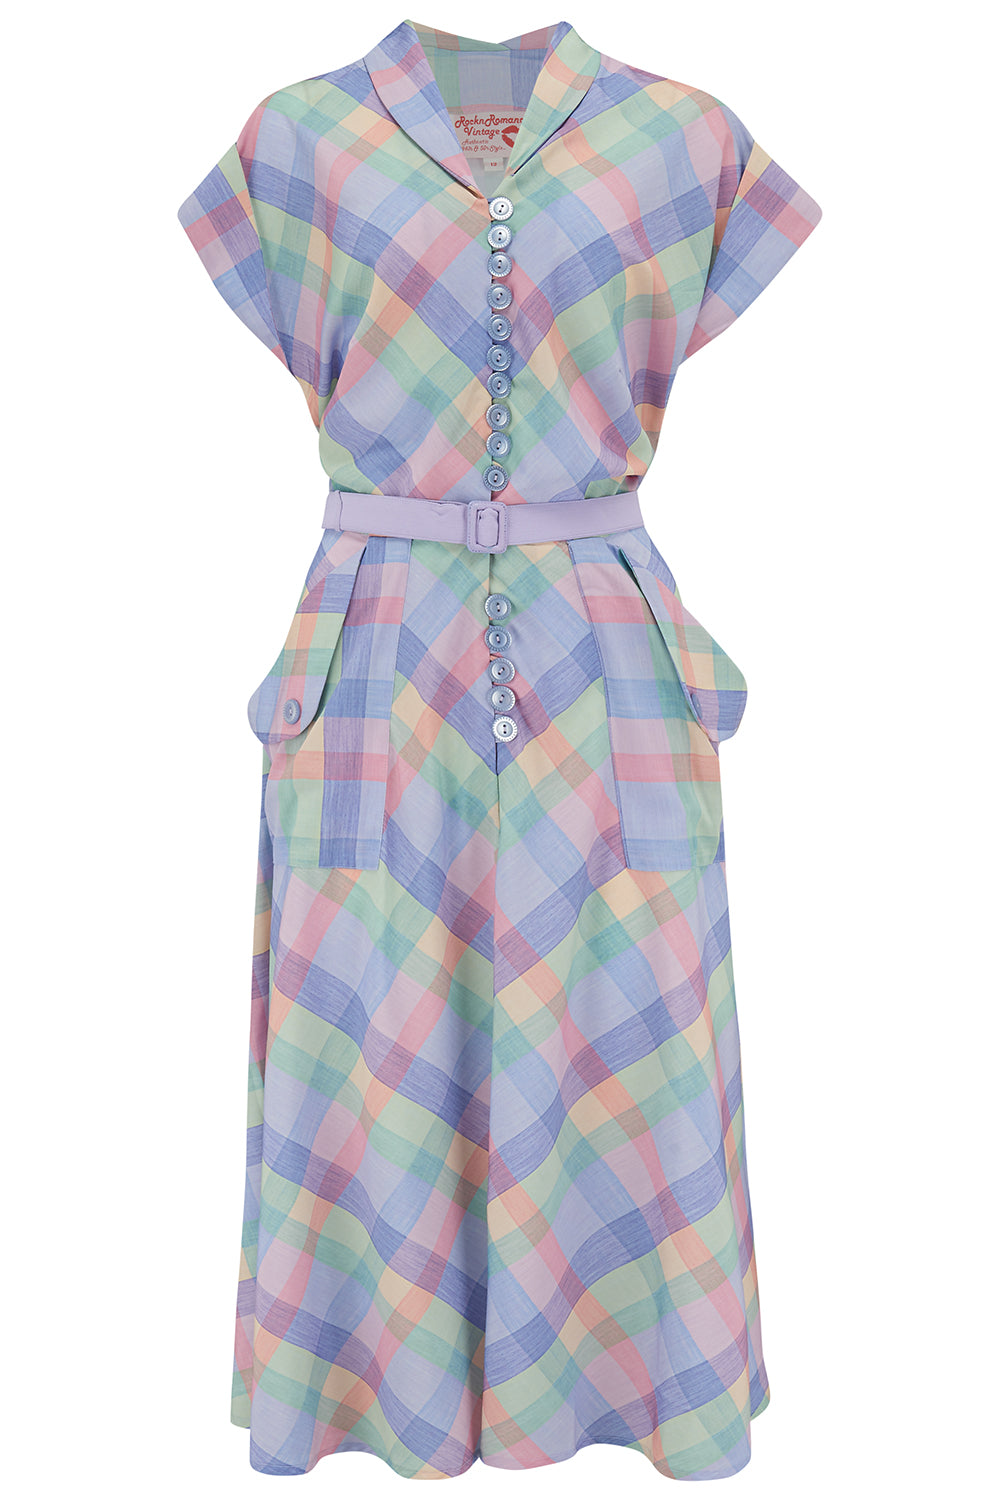 **Sample Sale** The "Casey" Dress in Summer Check Print, True & Authentic 1950s Vintage Style product